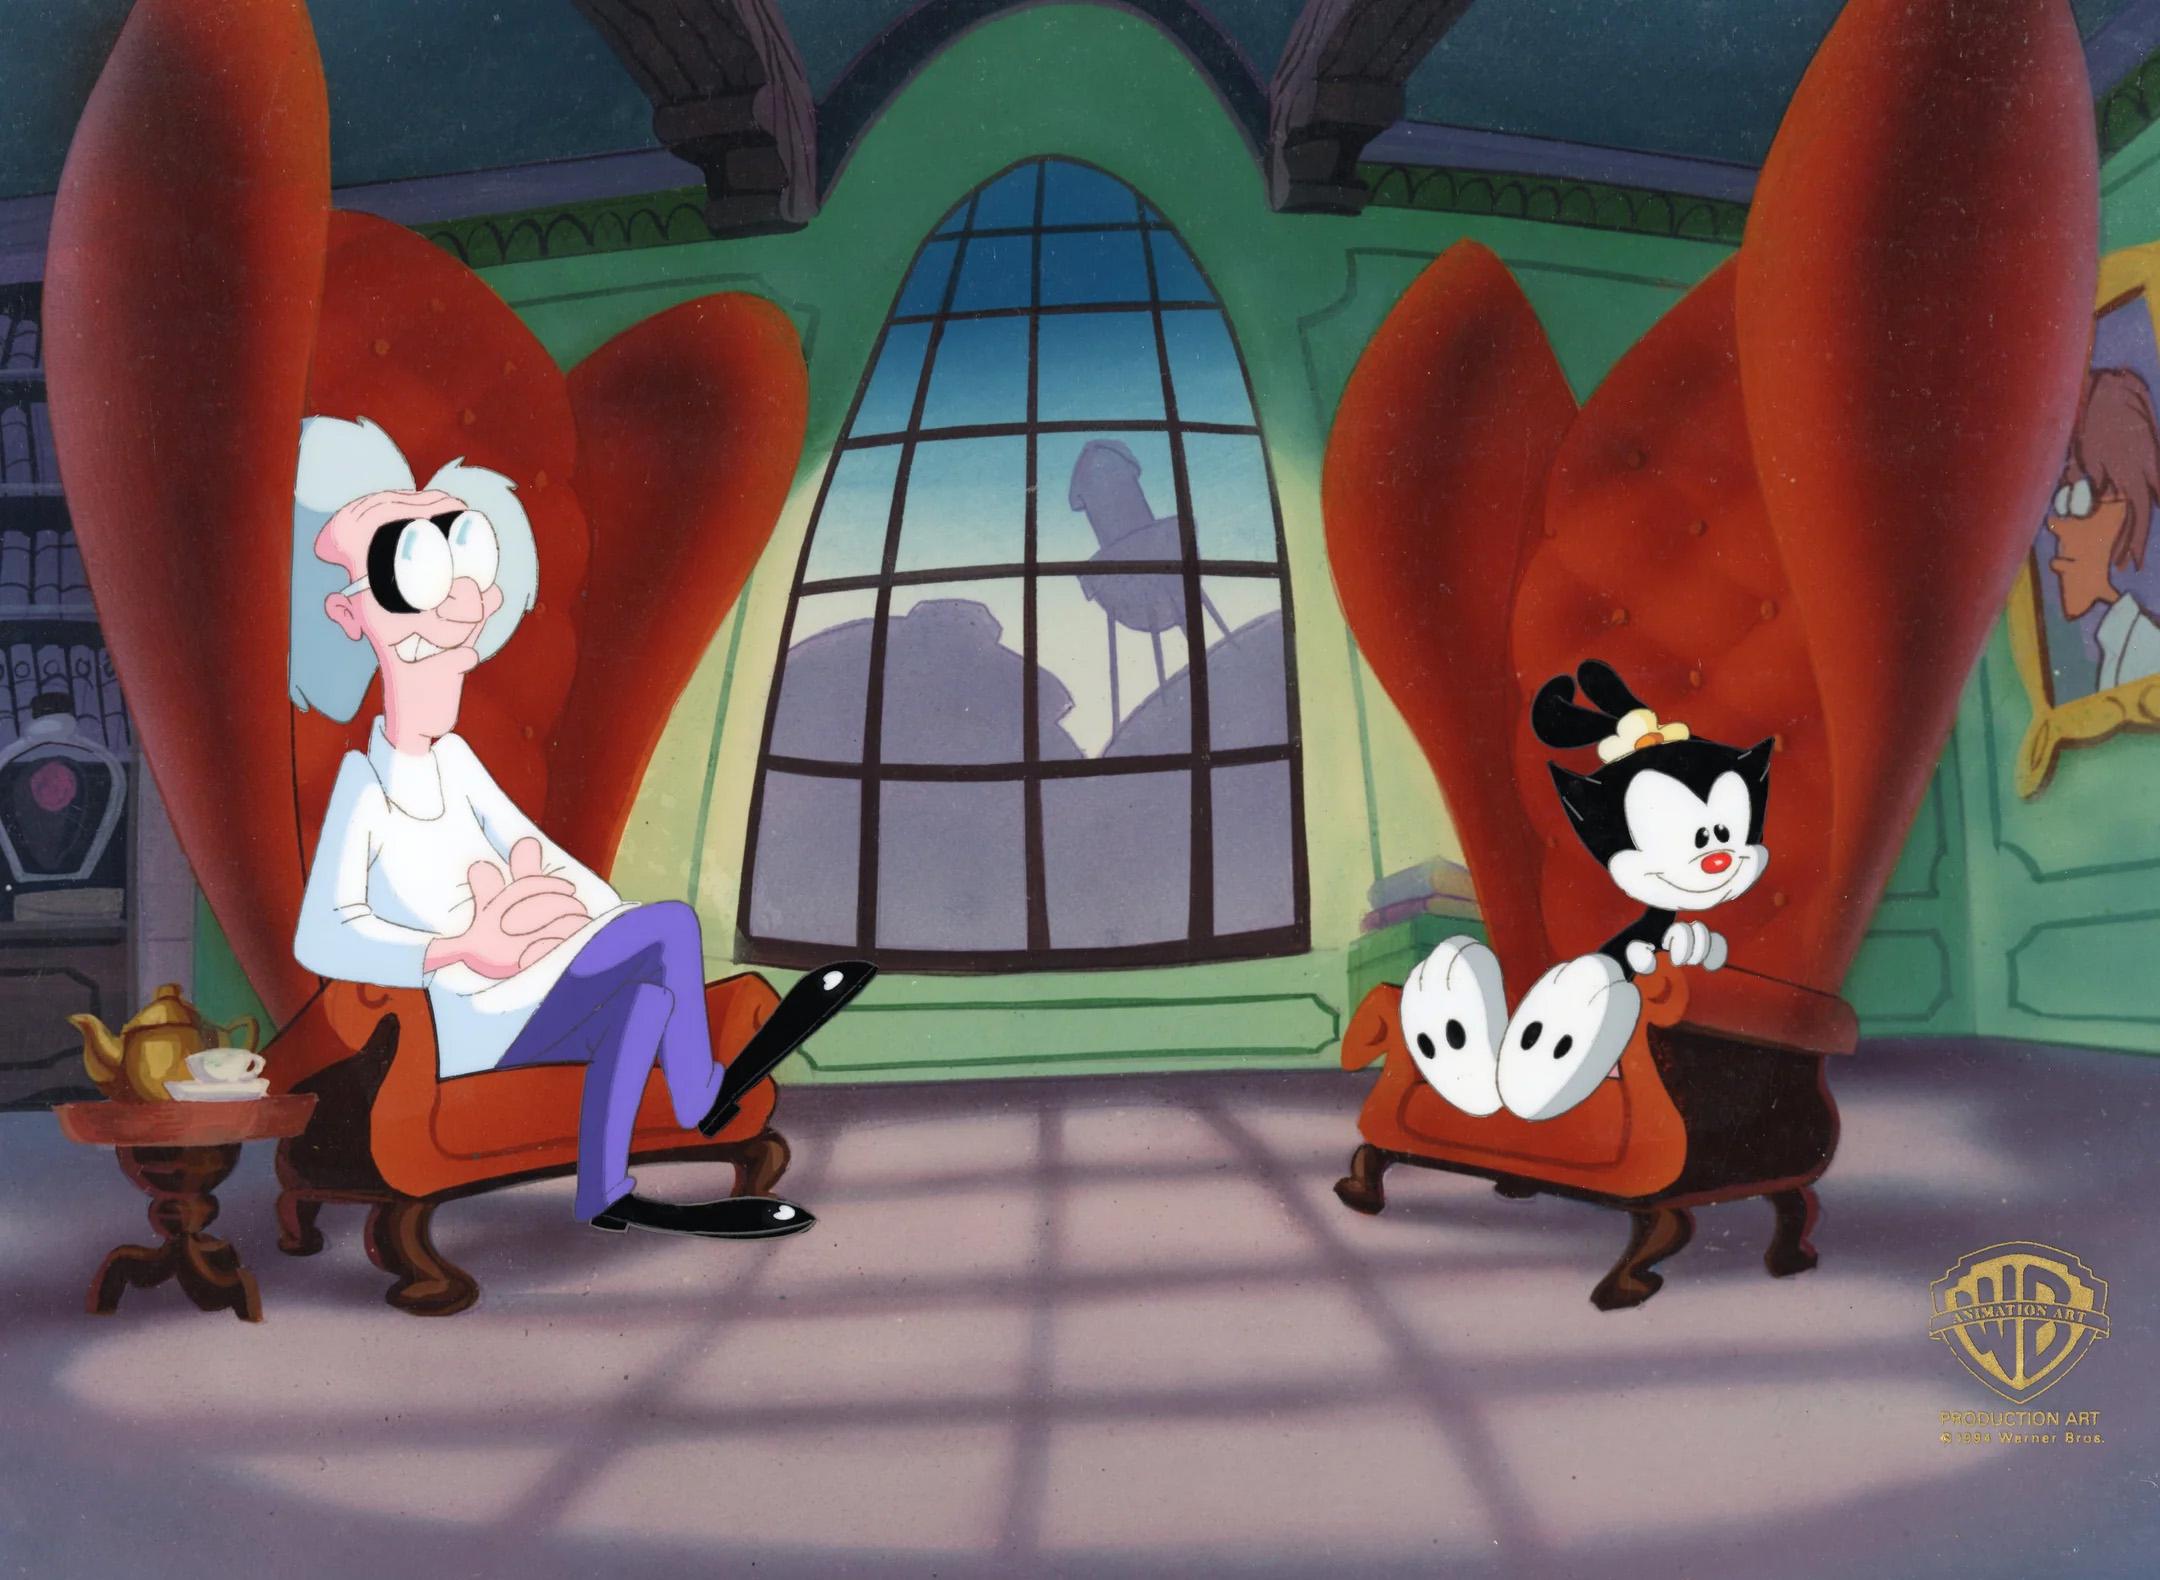 Animaniacs Original Production Cel: Dr. Scratchnsniff and Dot - Art by Warner Bros. Studio Artists